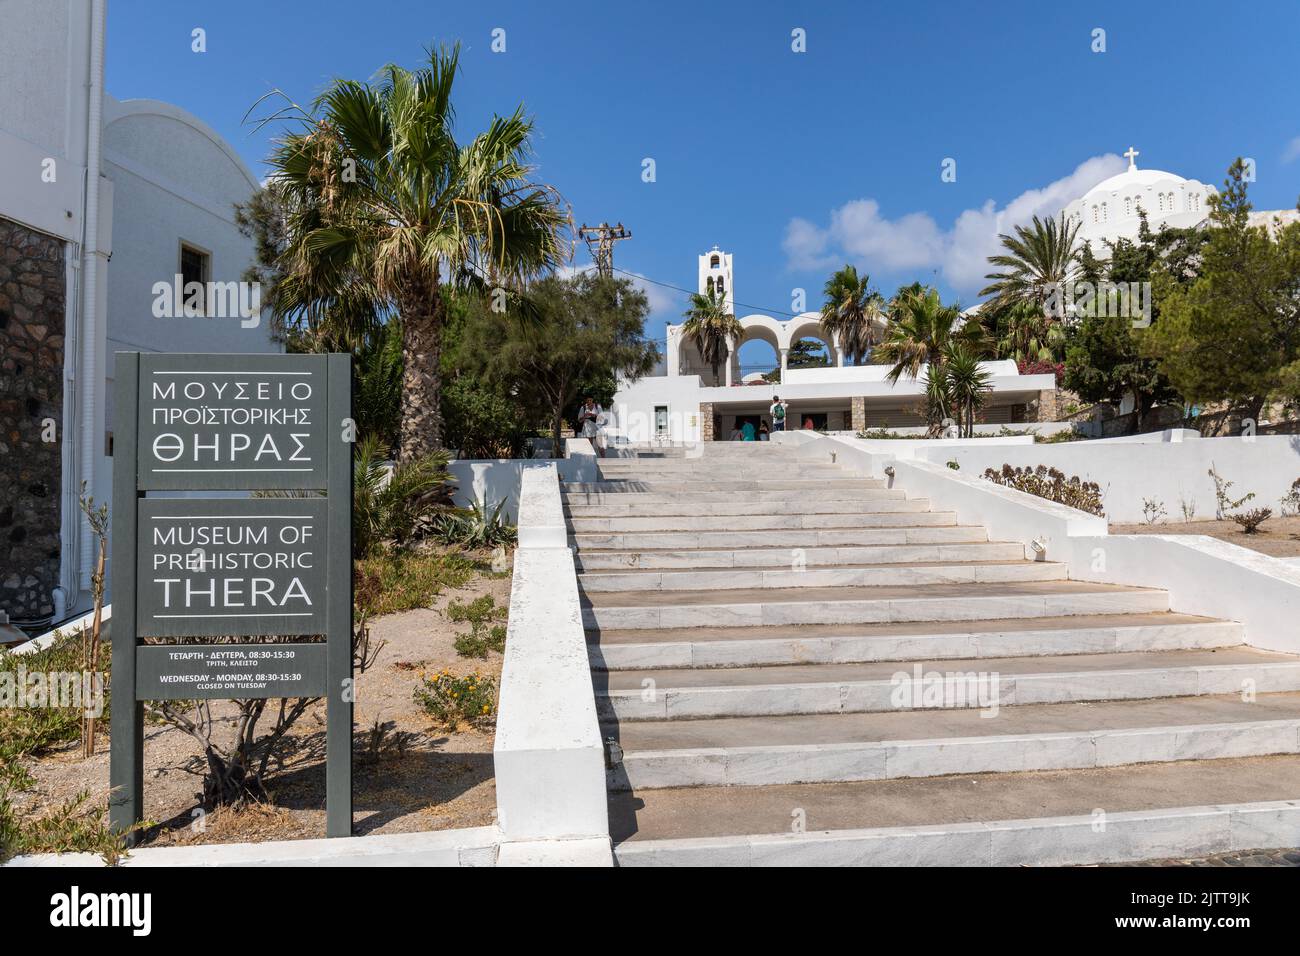 Museum of Prehistoric Thera which exhibits prehistoric findings excavated from Akrotiri Minoan site the Ancient Thera, Fira, Santorini, Greece, Europe Stock Photo